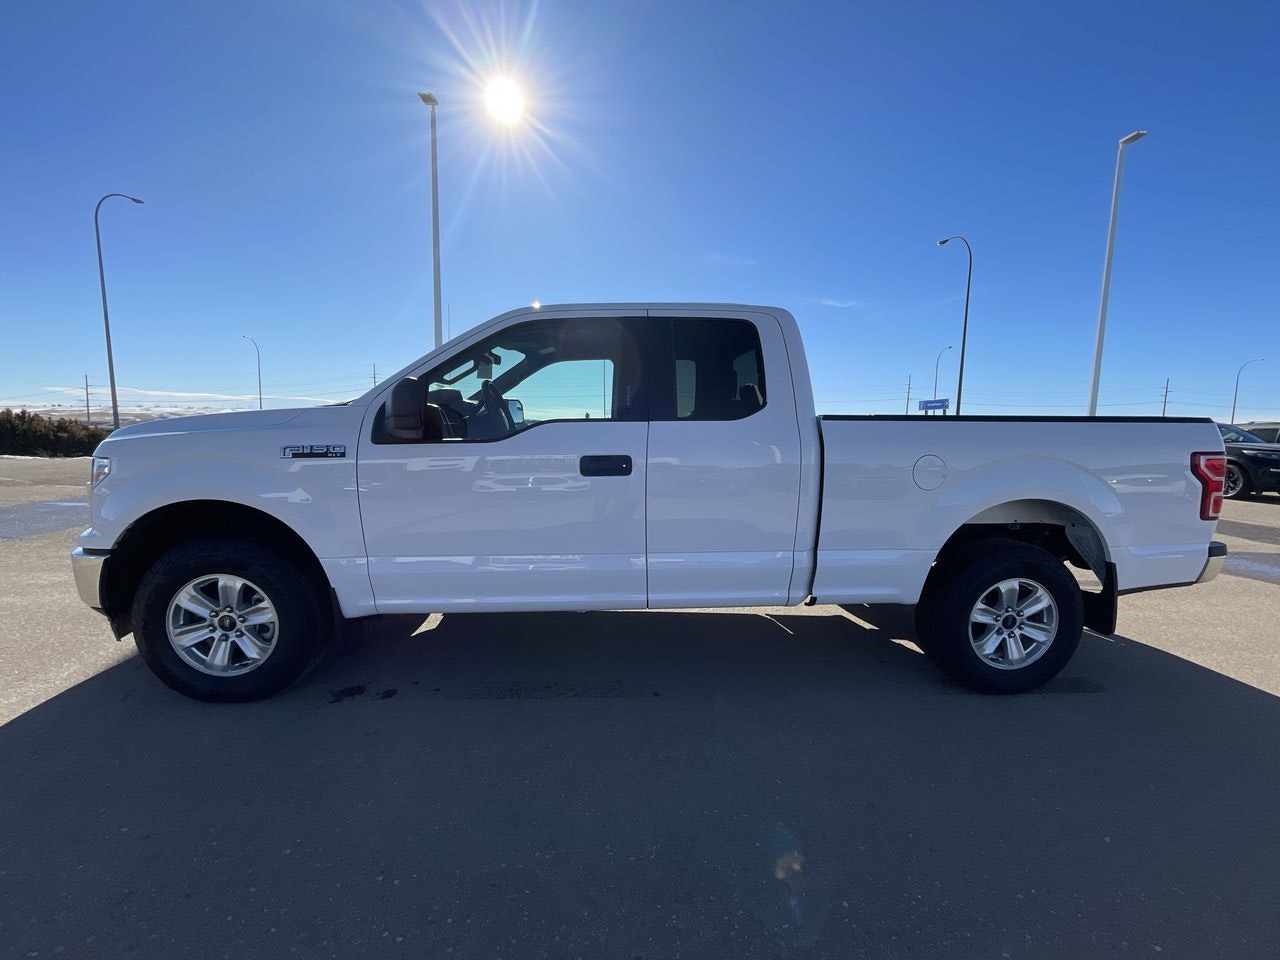 2018 Ford F-150 SuperCab 4x4 XLT with TOW PACKAGE (T123003A) Main Image